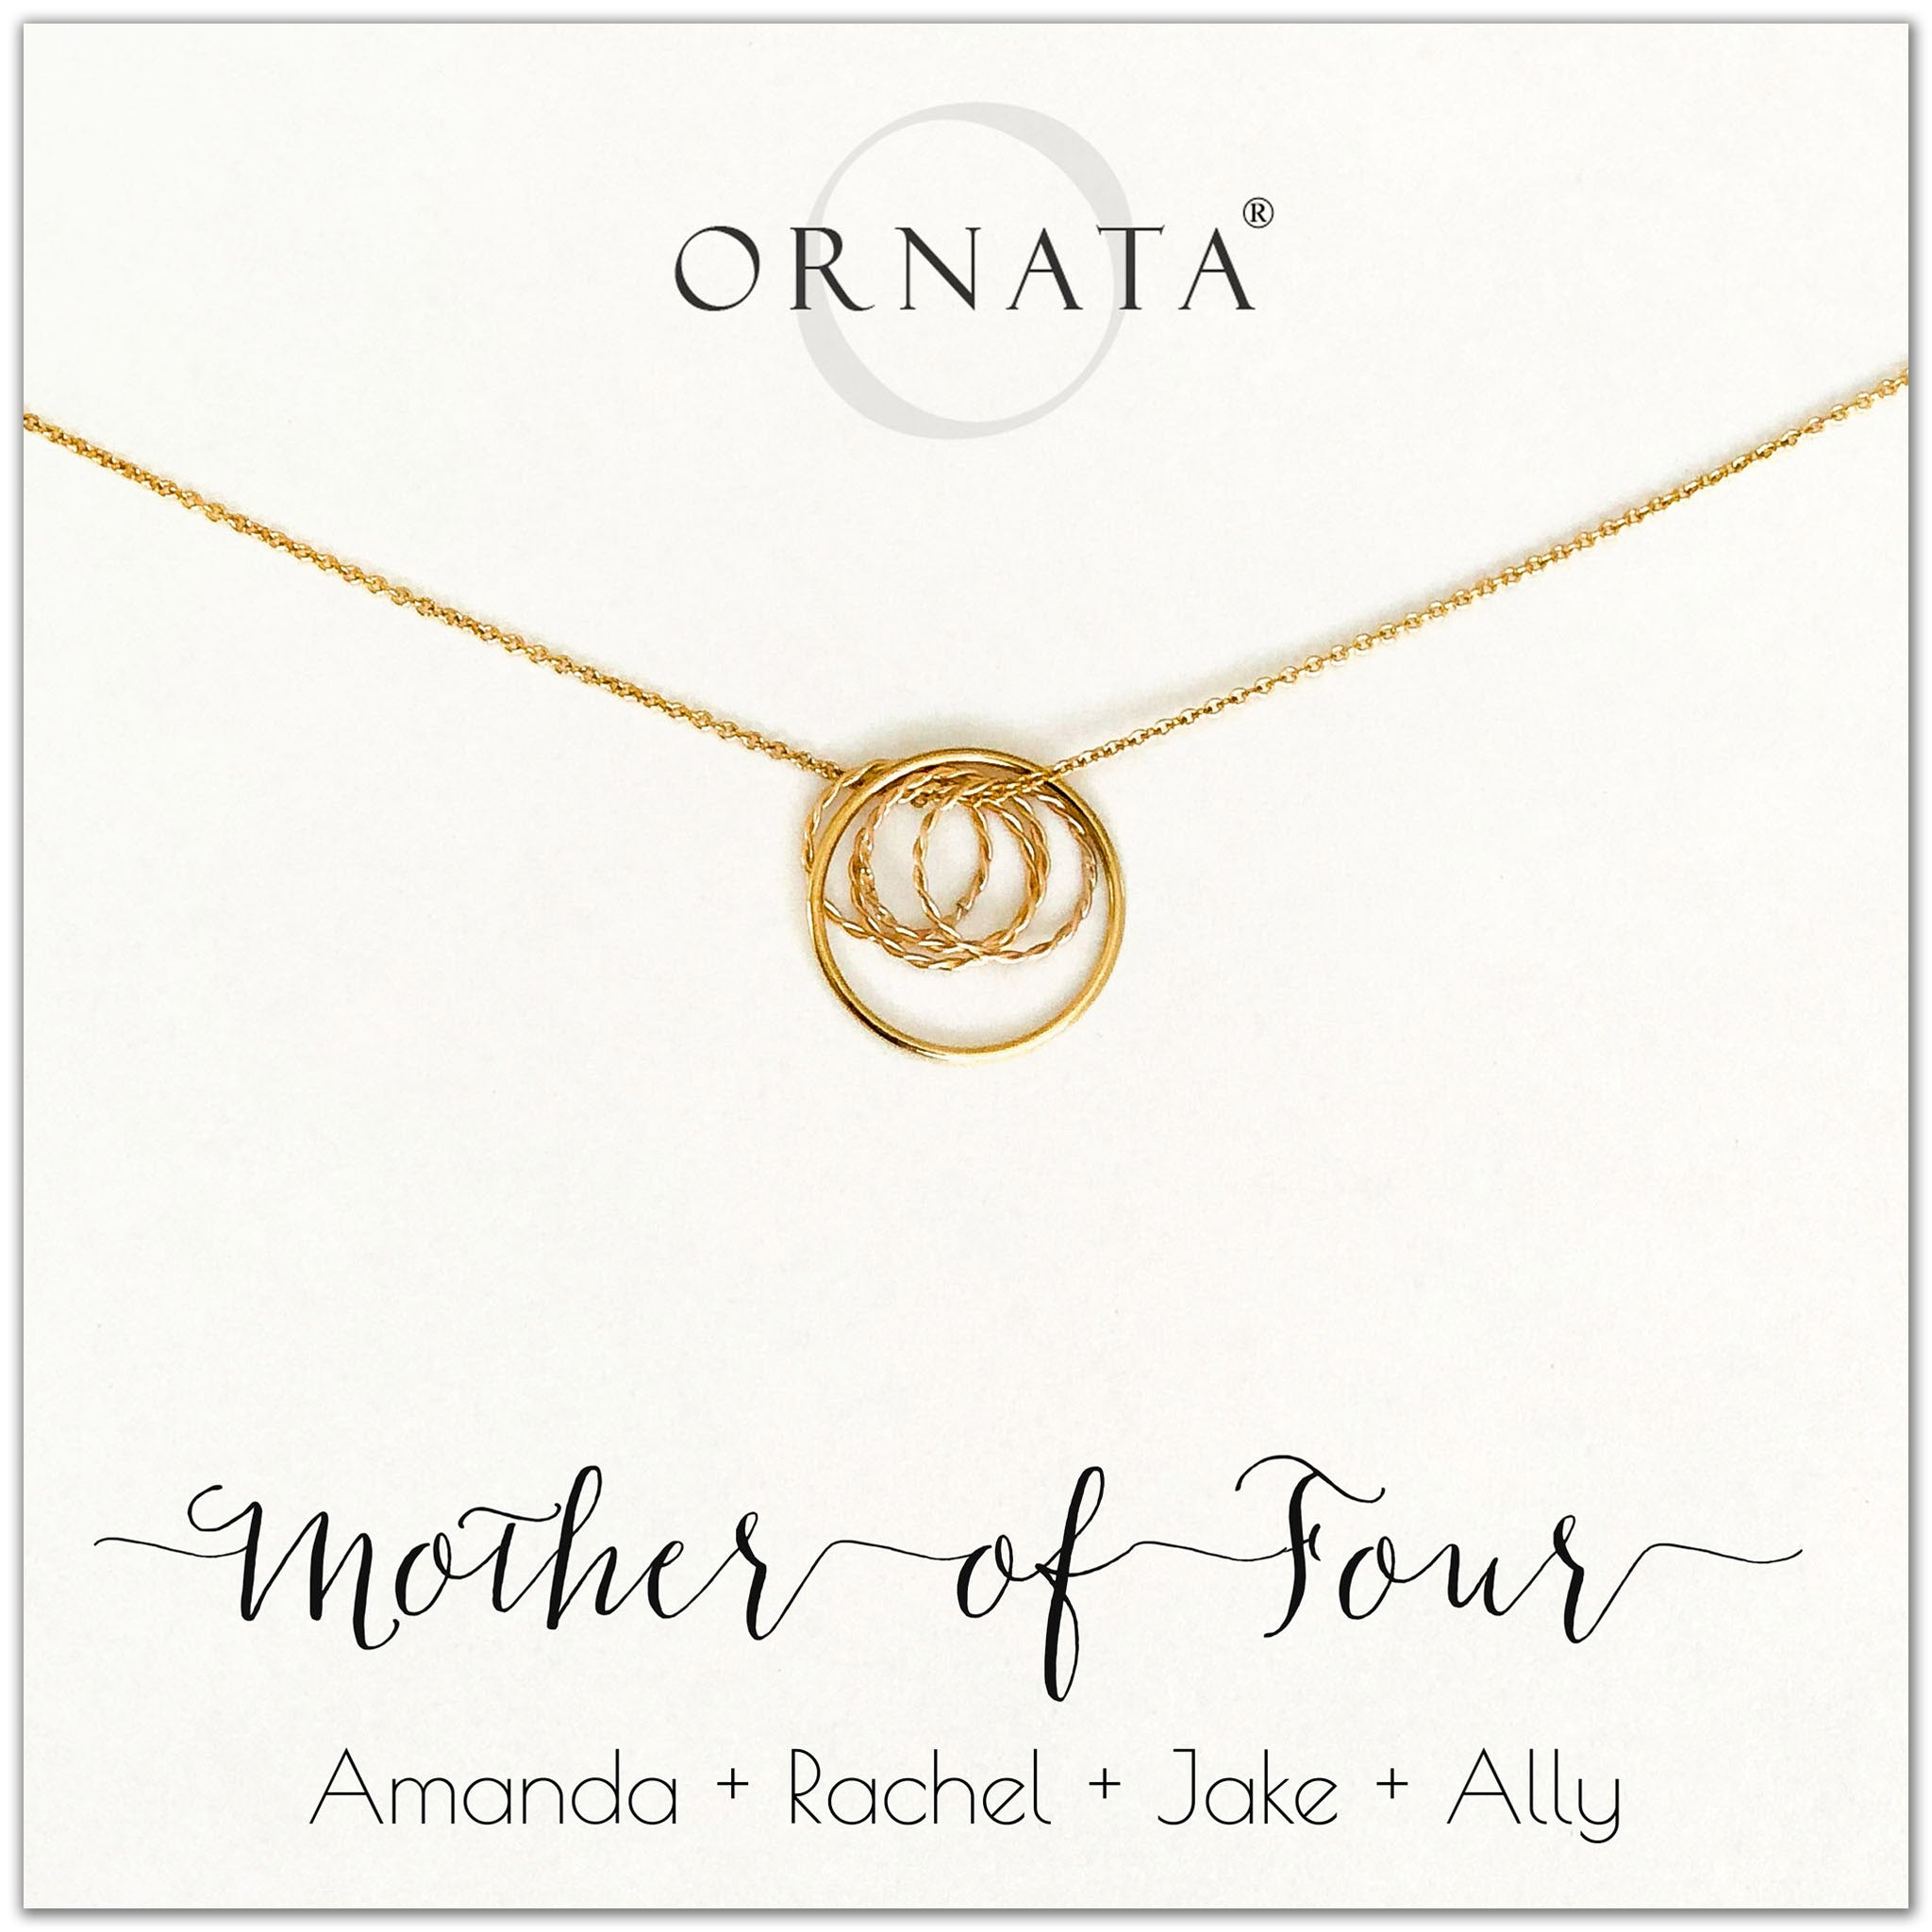 Mom or Mother of Four - personalized gold necklaces. Our 14 karat gold filled custom jewelry is a perfect gift for mothers of four children, daughters, granddaughters, grandmothers, sisters, best friends, wives, girlfriends, and family members. Also a good gift for Mother’s Day. 